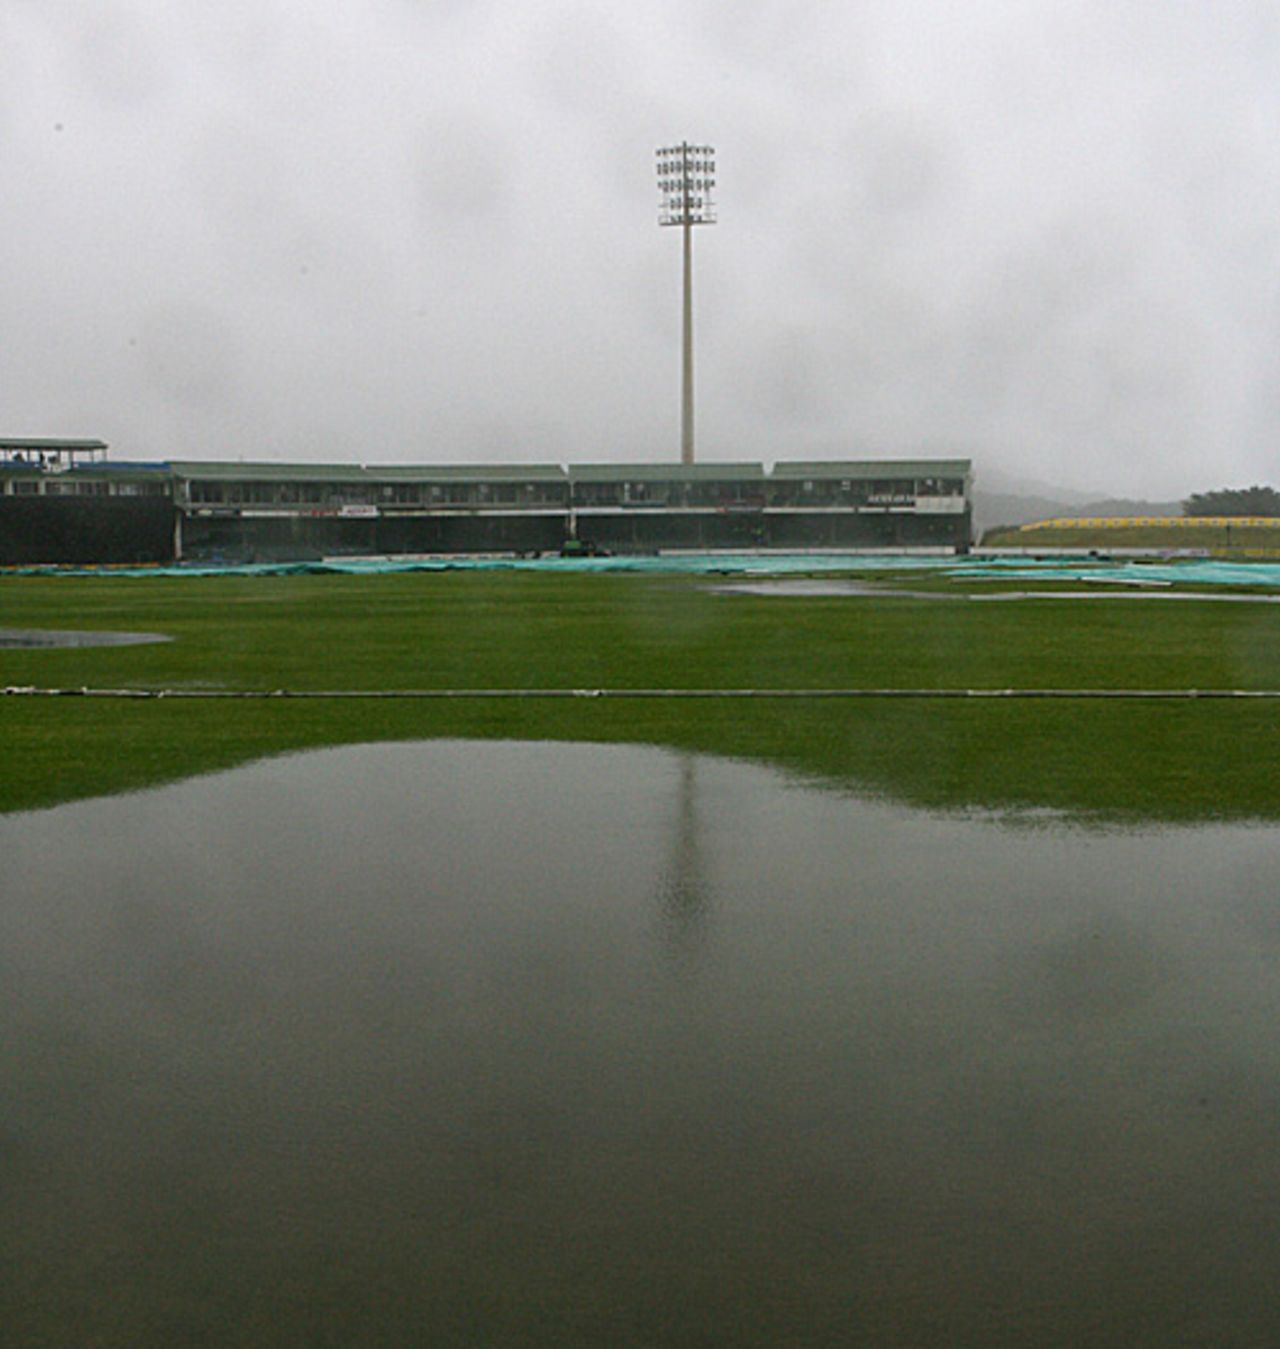 A miserable scene at East London where the third and final ODI against Bangladesh was abandoned, South Africa v Bangladesh, 3rd ODI, East London, November 12, 2008